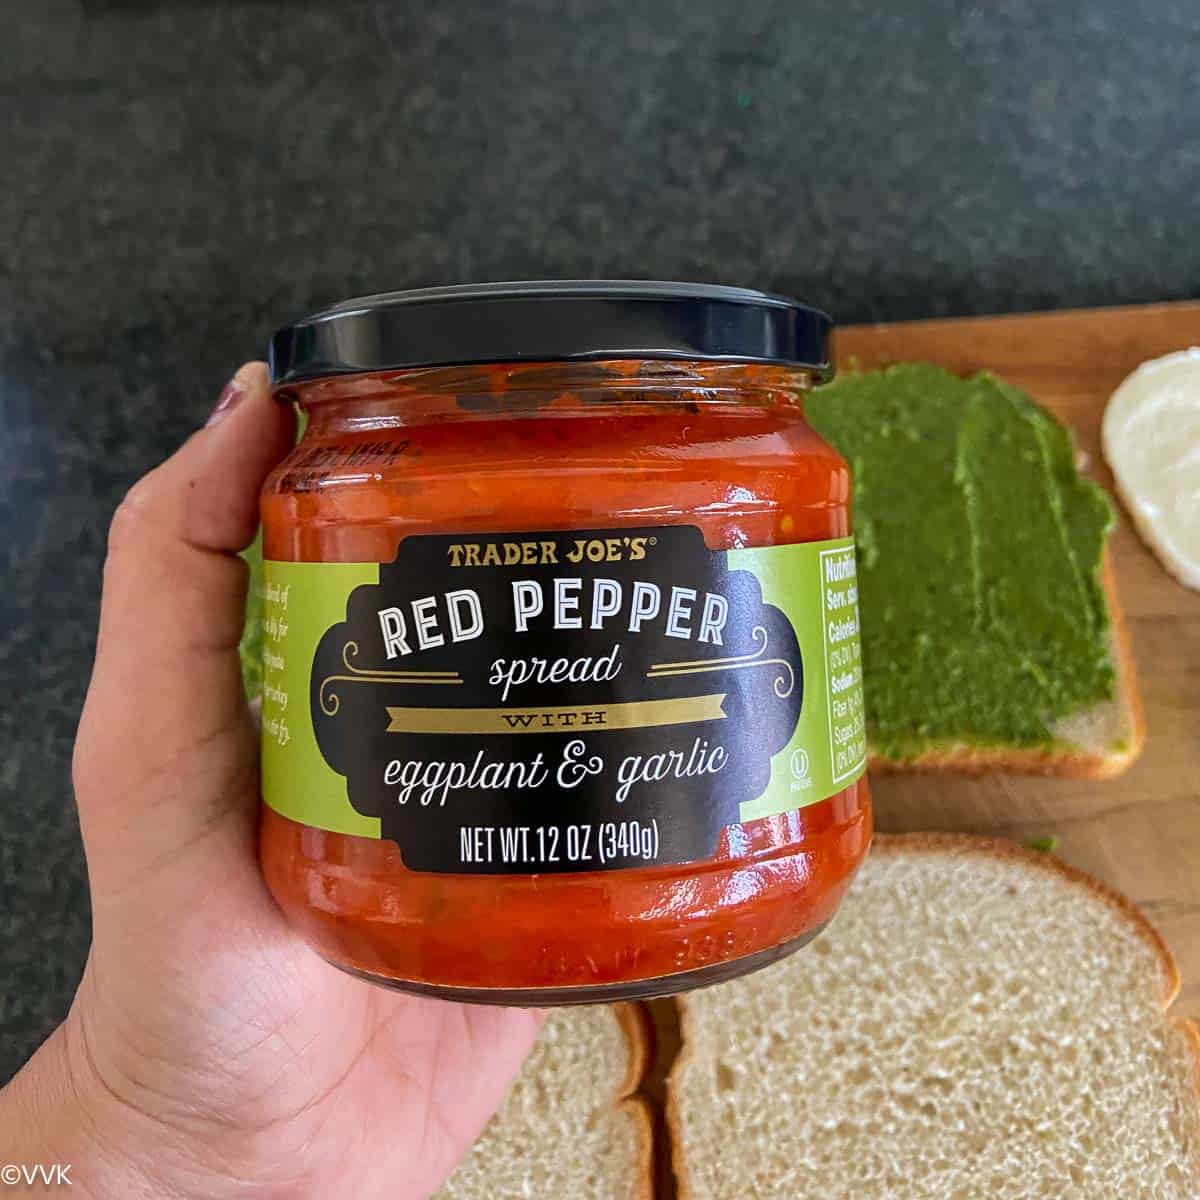 the store bought red pepper spread